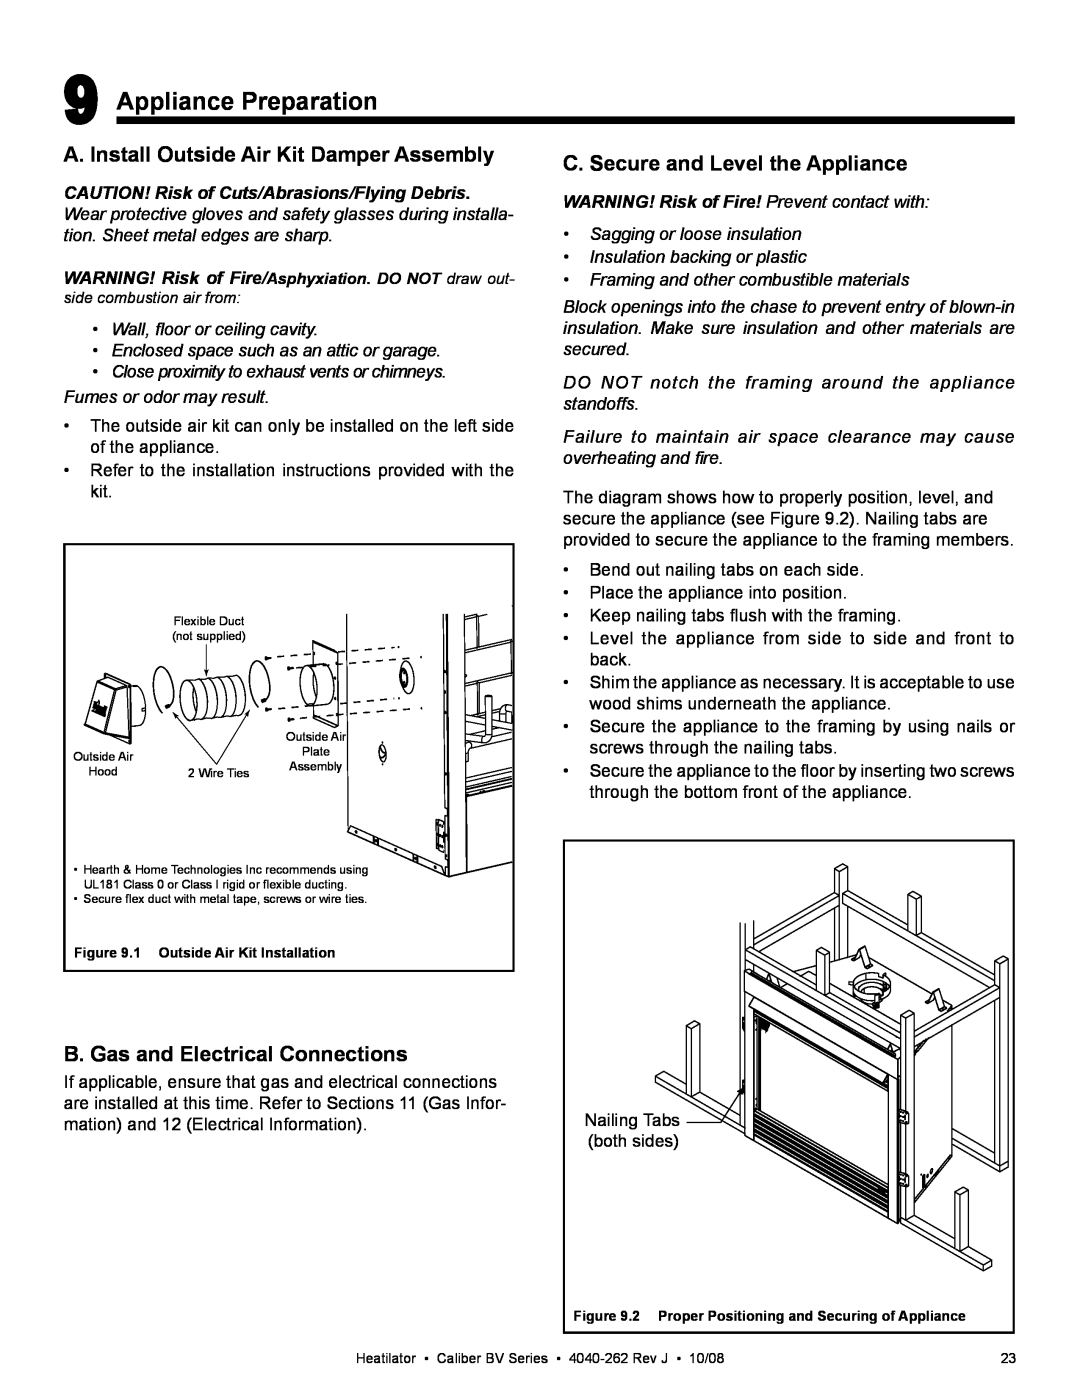 Hearth and Home Technologies CB4842IR Appliance Preparation, A. Install Outside Air Kit Damper Assembly, secured, back 